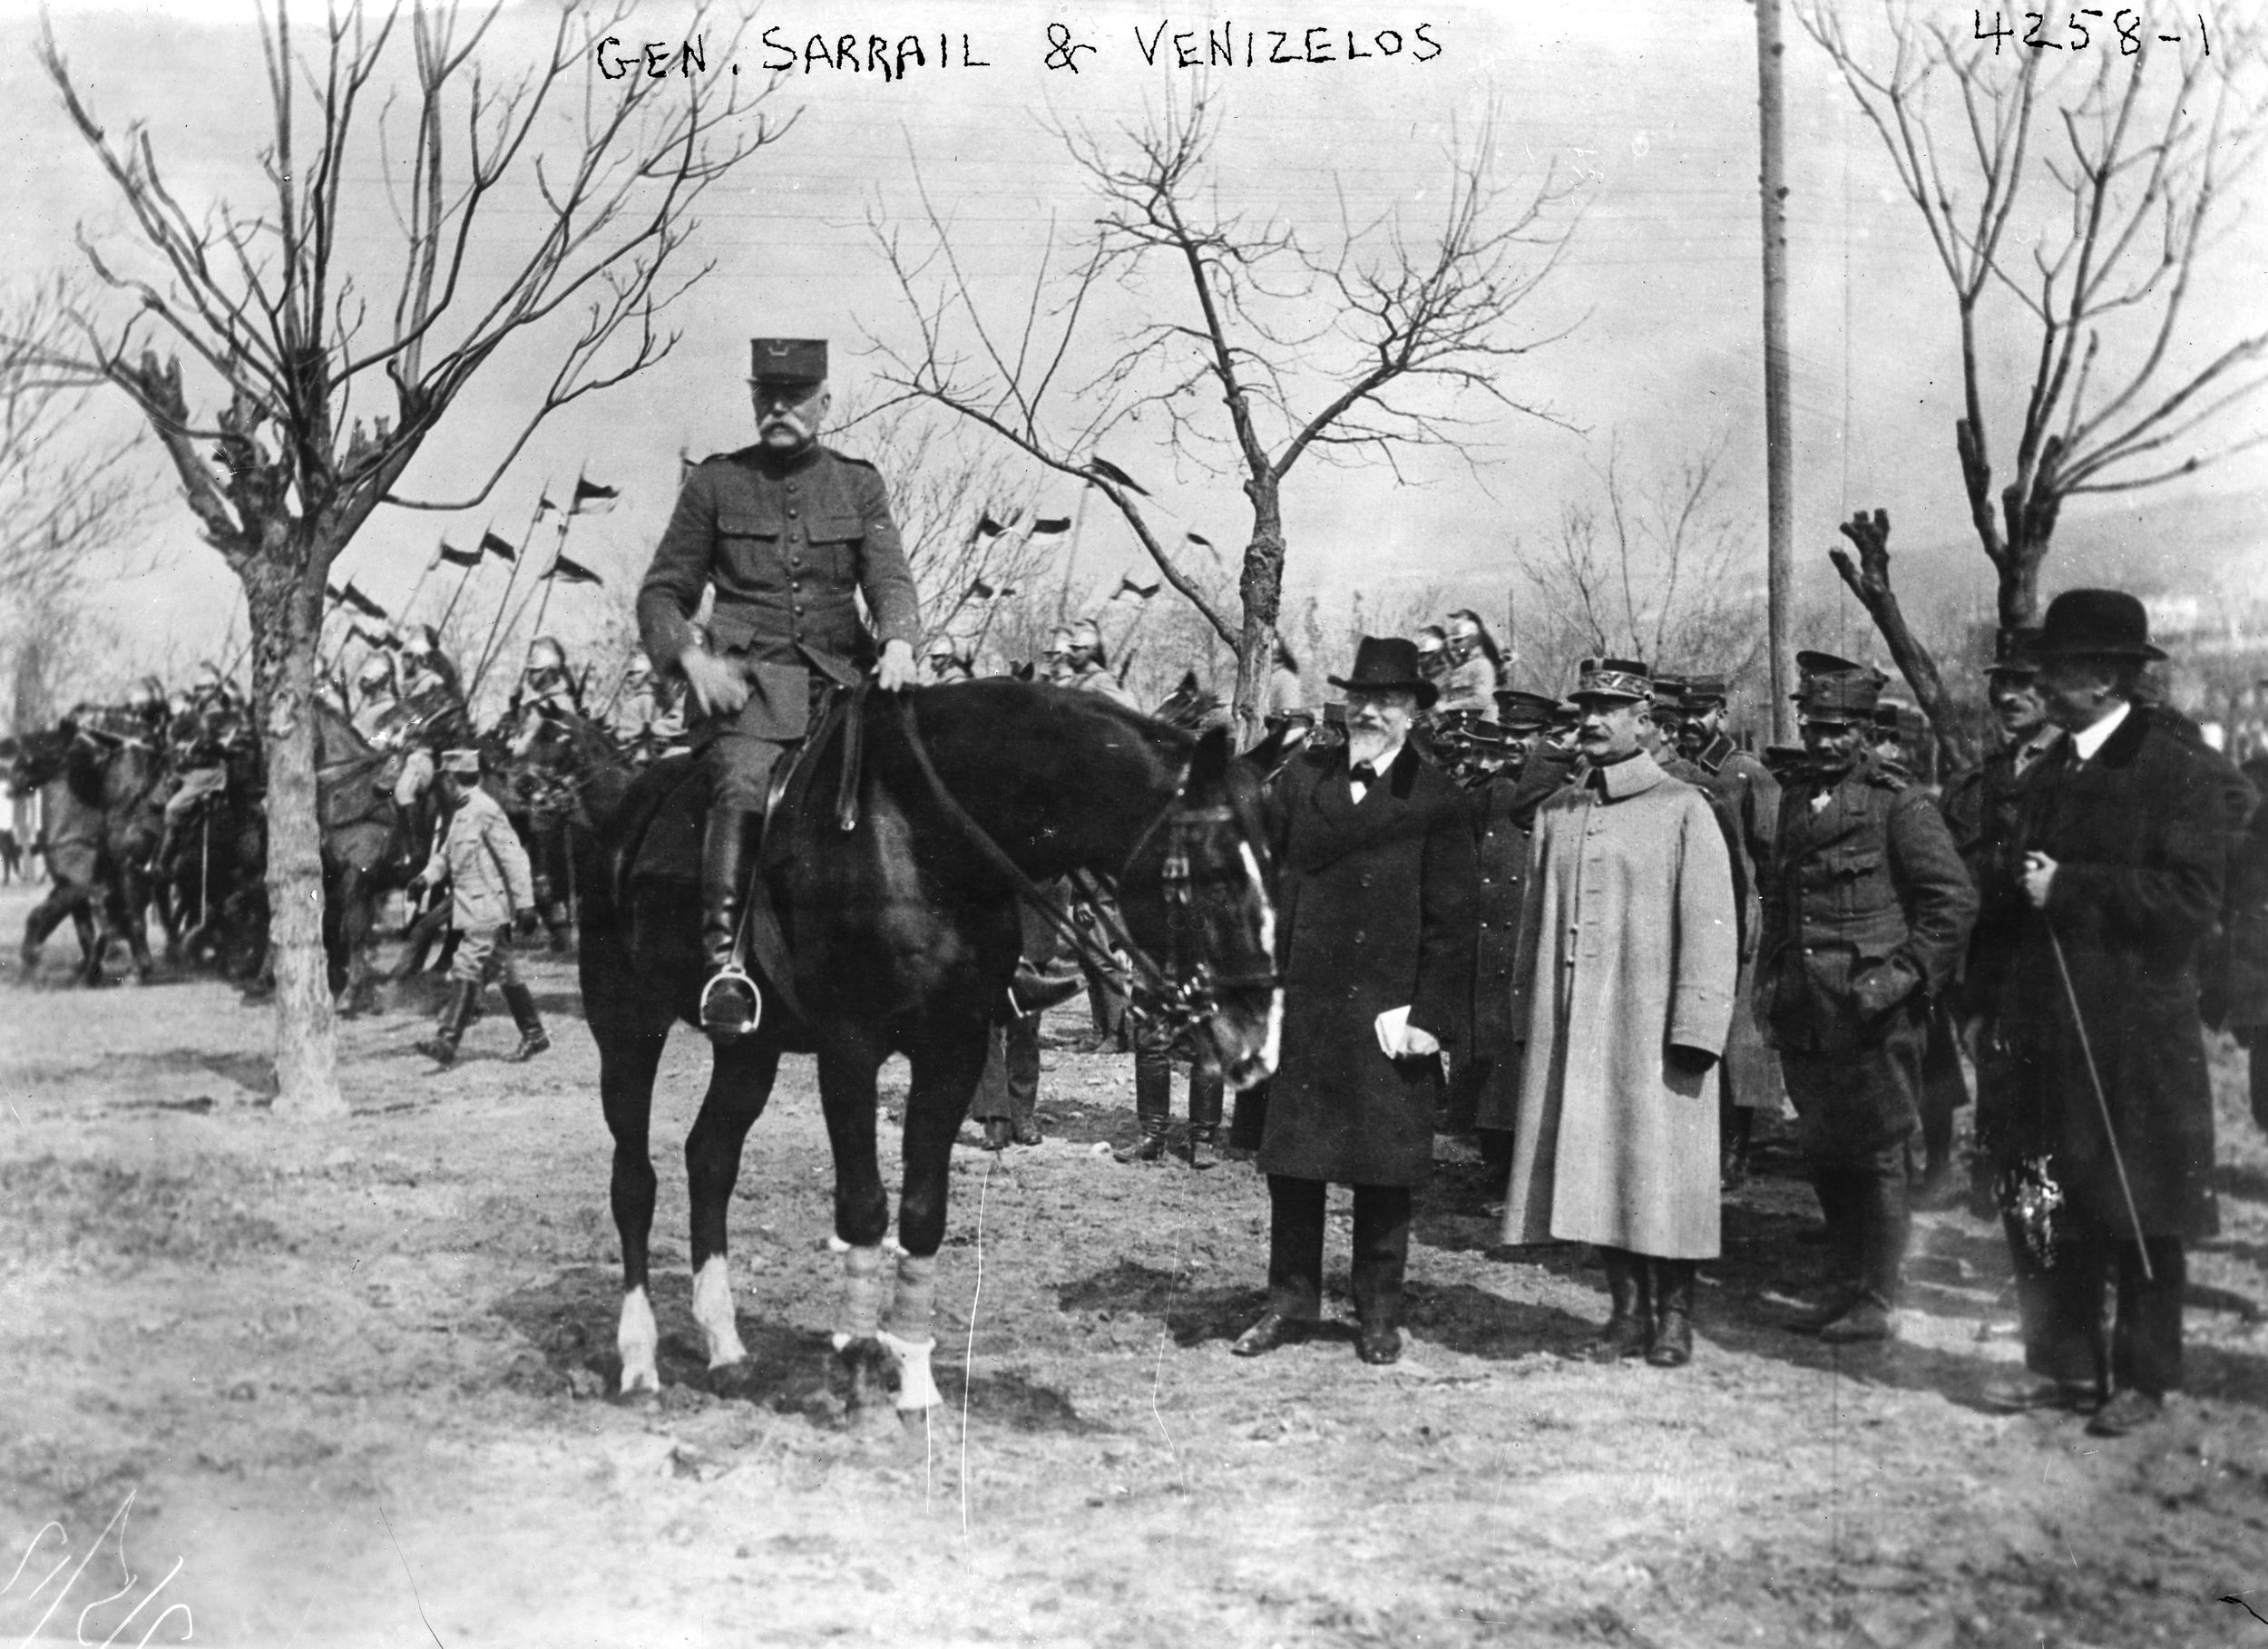 Allied commander Maurice Sarrail on horseback at Salonika with Greek Prime Minister Eleutherios Venizelos, bearded in black.